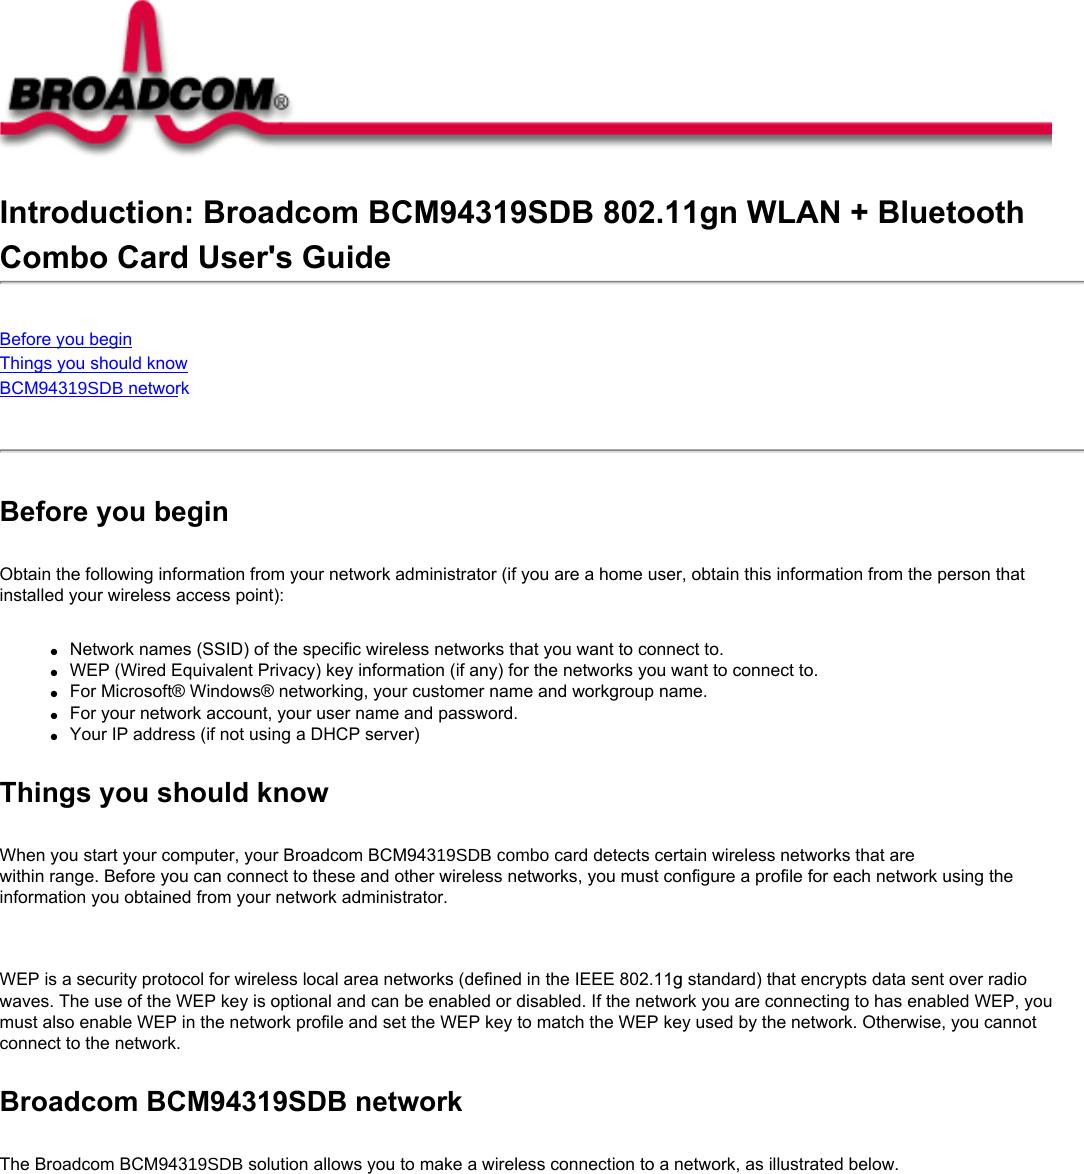 Introduction: Broadcom BCM94319SDB 802.11gn WLAN + Bluetooth Combo Card User&apos;s GuideBefore you beginThings you should knowBCM94319SDB network Before you beginObtain the following information from your network administrator (if you are a home user, obtain this information from the person that installed your wireless access point):●     Network names (SSID) of the specific wireless networks that you want to connect to.●     WEP (Wired Equivalent Privacy) key information (if any) for the networks you want to connect to.●     For Microsoft® Windows® networking, your customer name and workgroup name.●     For your network account, your user name and password.●     Your IP address (if not using a DHCP server)Things you should knowWhen you start your computer, your Broadcom BCM94319SDB combo card detects certain wireless networks that are within range. Before you can connect to these and other wireless networks, you must configure a profile for each network using the information you obtained from your network administrator.   WEP is a security protocol for wireless local area networks (defined in the IEEE 802.11g standard) that encrypts data sent over radio waves. The use of the WEP key is optional and can be enabled or disabled. If the network you are connecting to has enabled WEP, you must also enable WEP in the network profile and set the WEP key to match the WEP key used by the network. Otherwise, you cannot connect to the network.Broadcom BCM94319SDB networkThe Broadcom BCM94319SDB solution allows you to make a wireless connection to a network, as illustrated below.